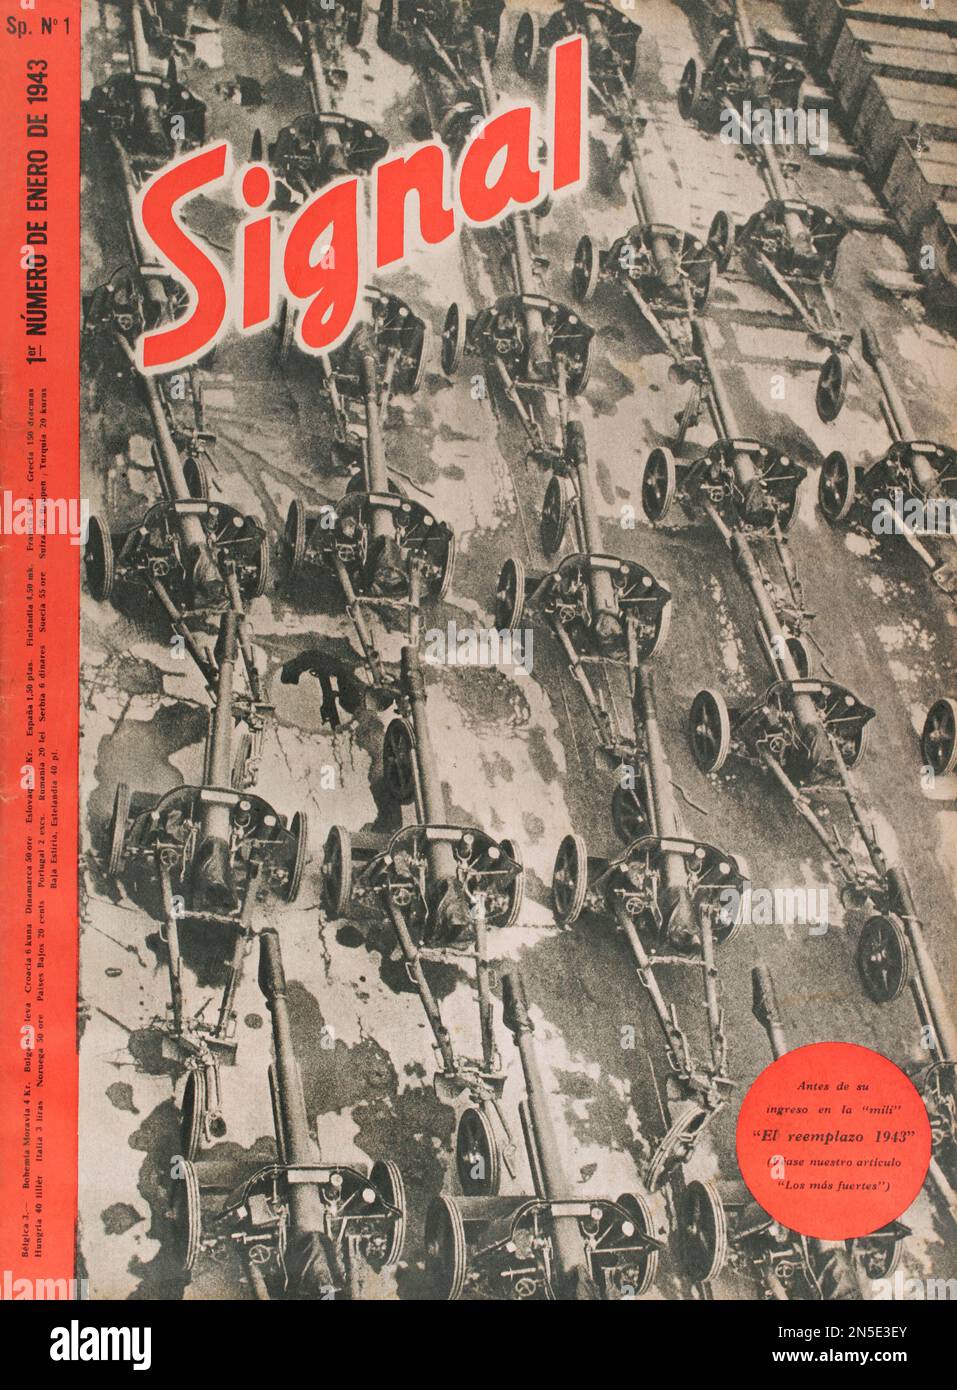 'Signal' magazine. Cover of issue number 1 (January 1943) of the Spanish edition (SP 1), with a photograph of cannons. Before his entry into the military service, the 1943 recruitment. This German magazine was published between April 1940 and April 1945, being the main propaganda organ of the German army during the Second World War. Stock Photo